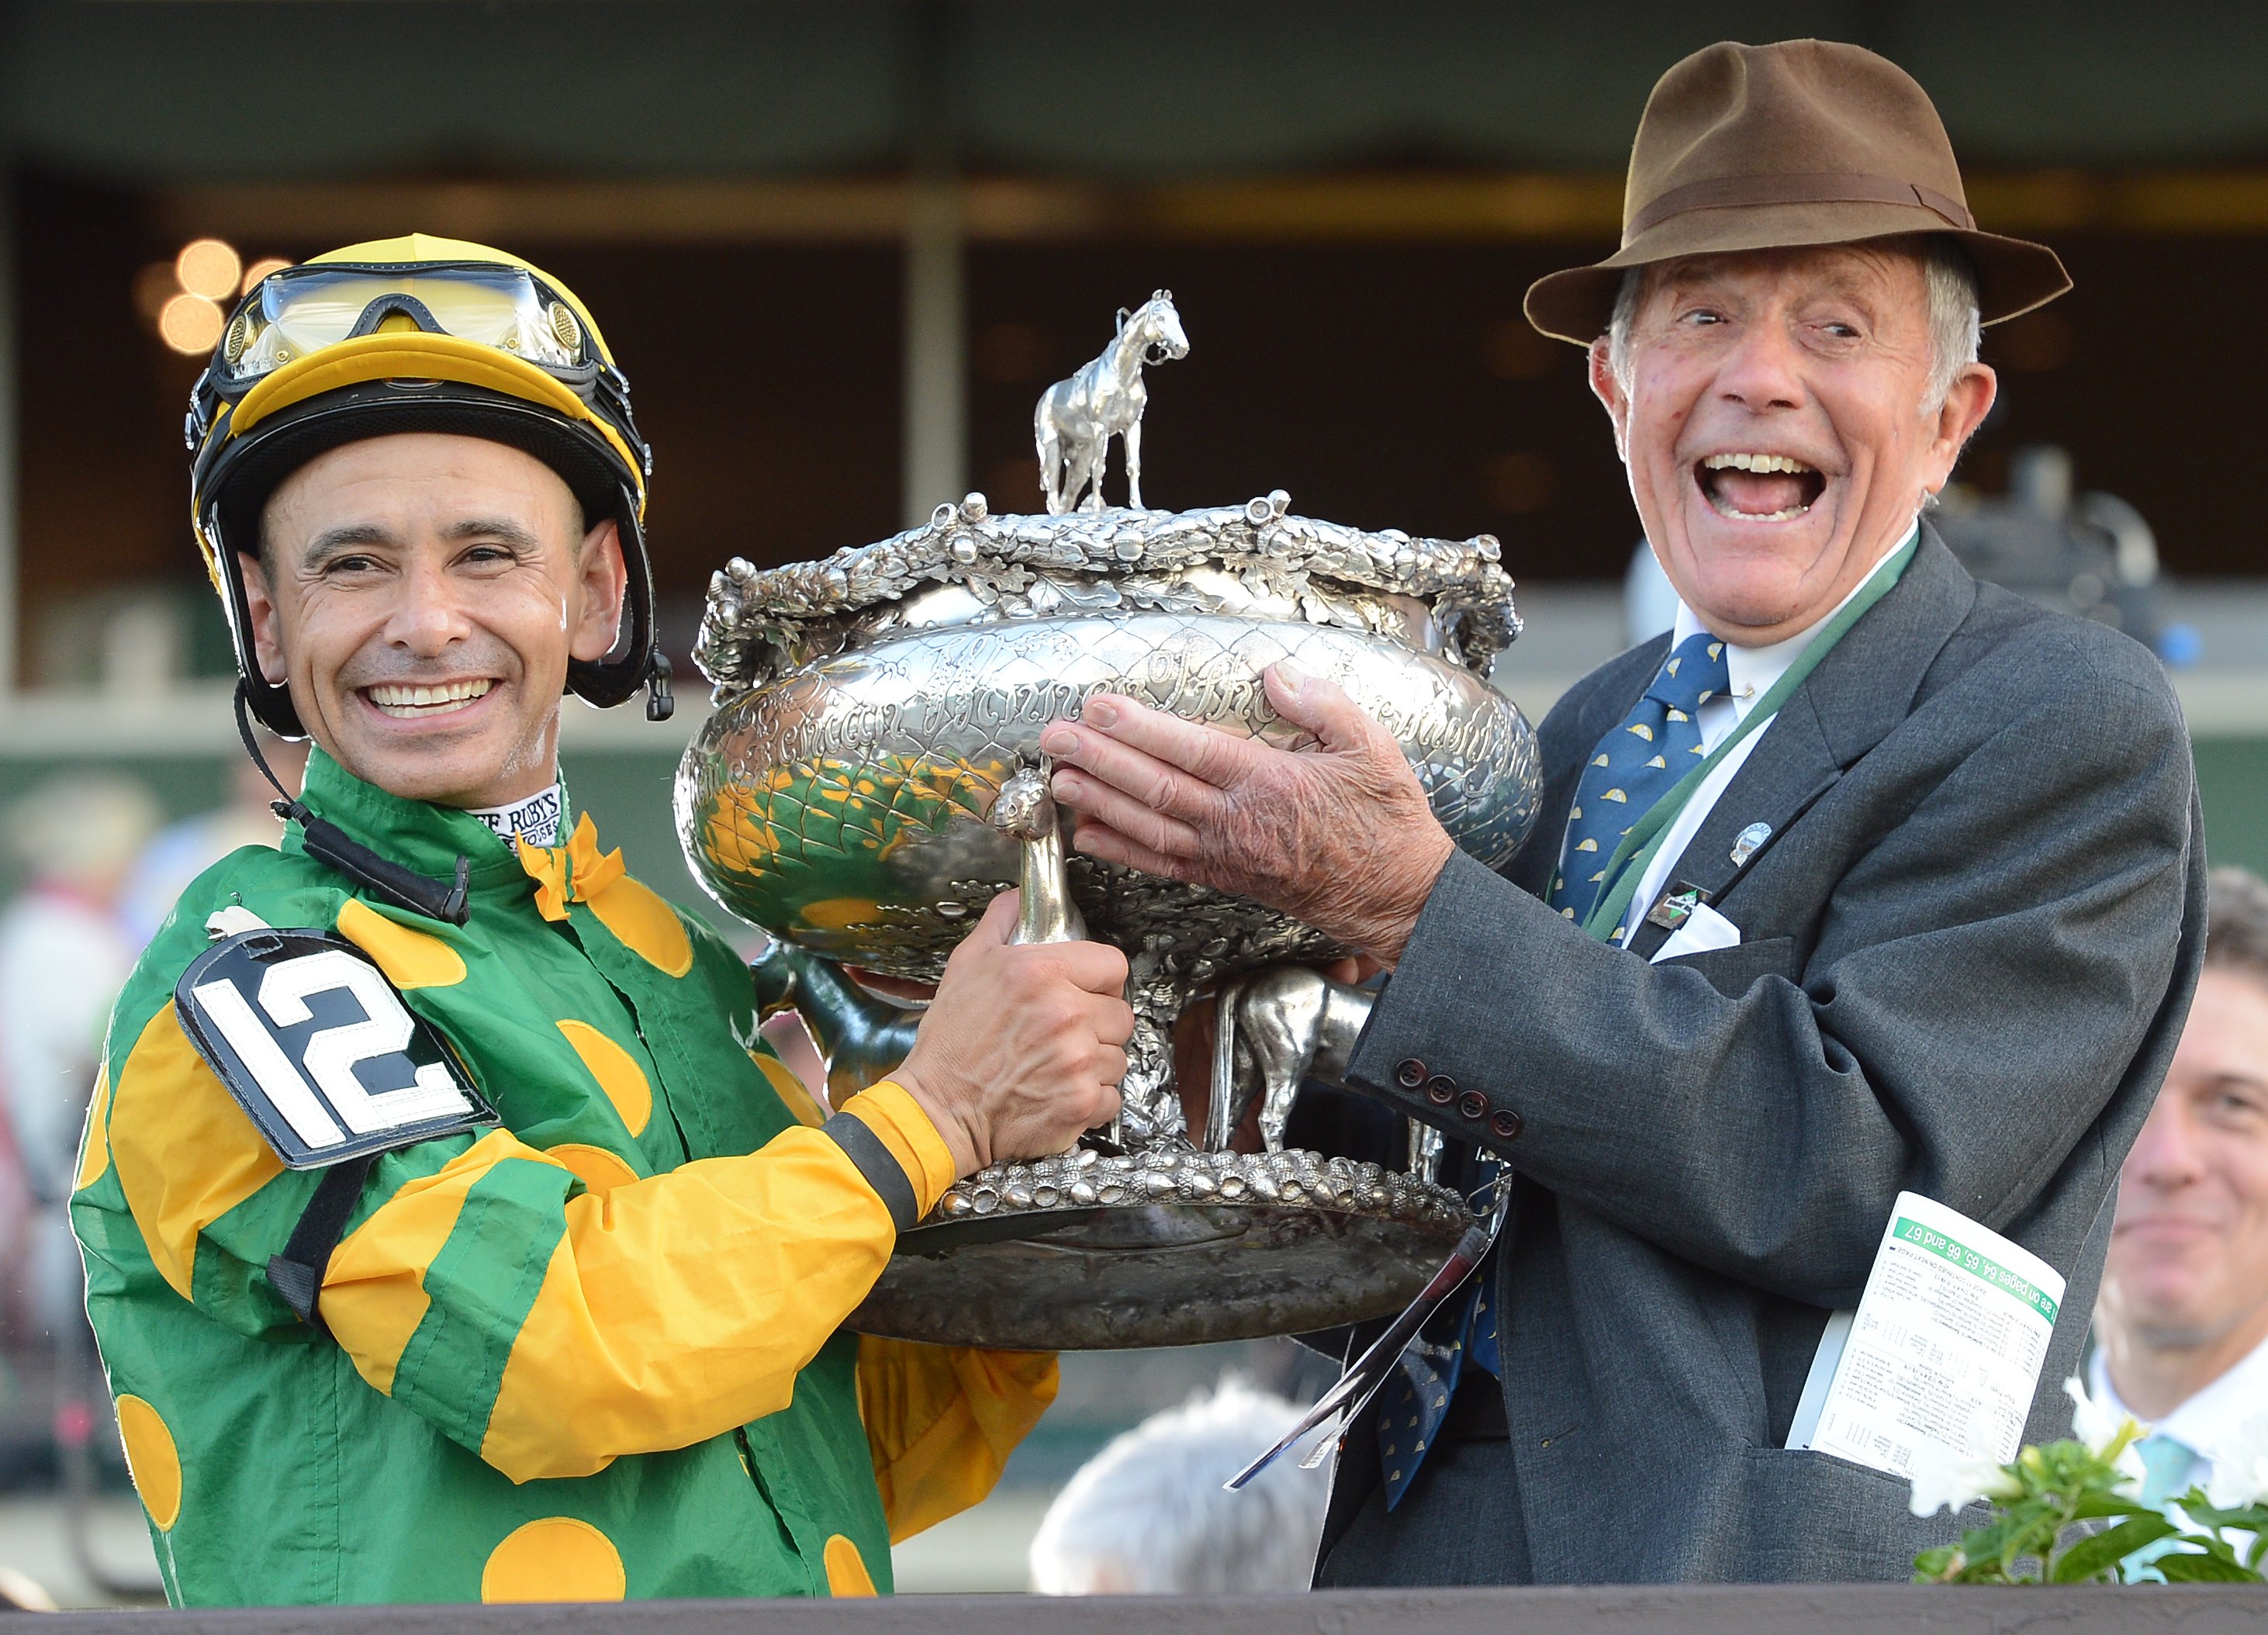 Mike Smith and Cot Campbell raise the Belmont Stakes Trophy in celebration of Palace Malice's 2013 Belmont Stakes victory (NYRA)